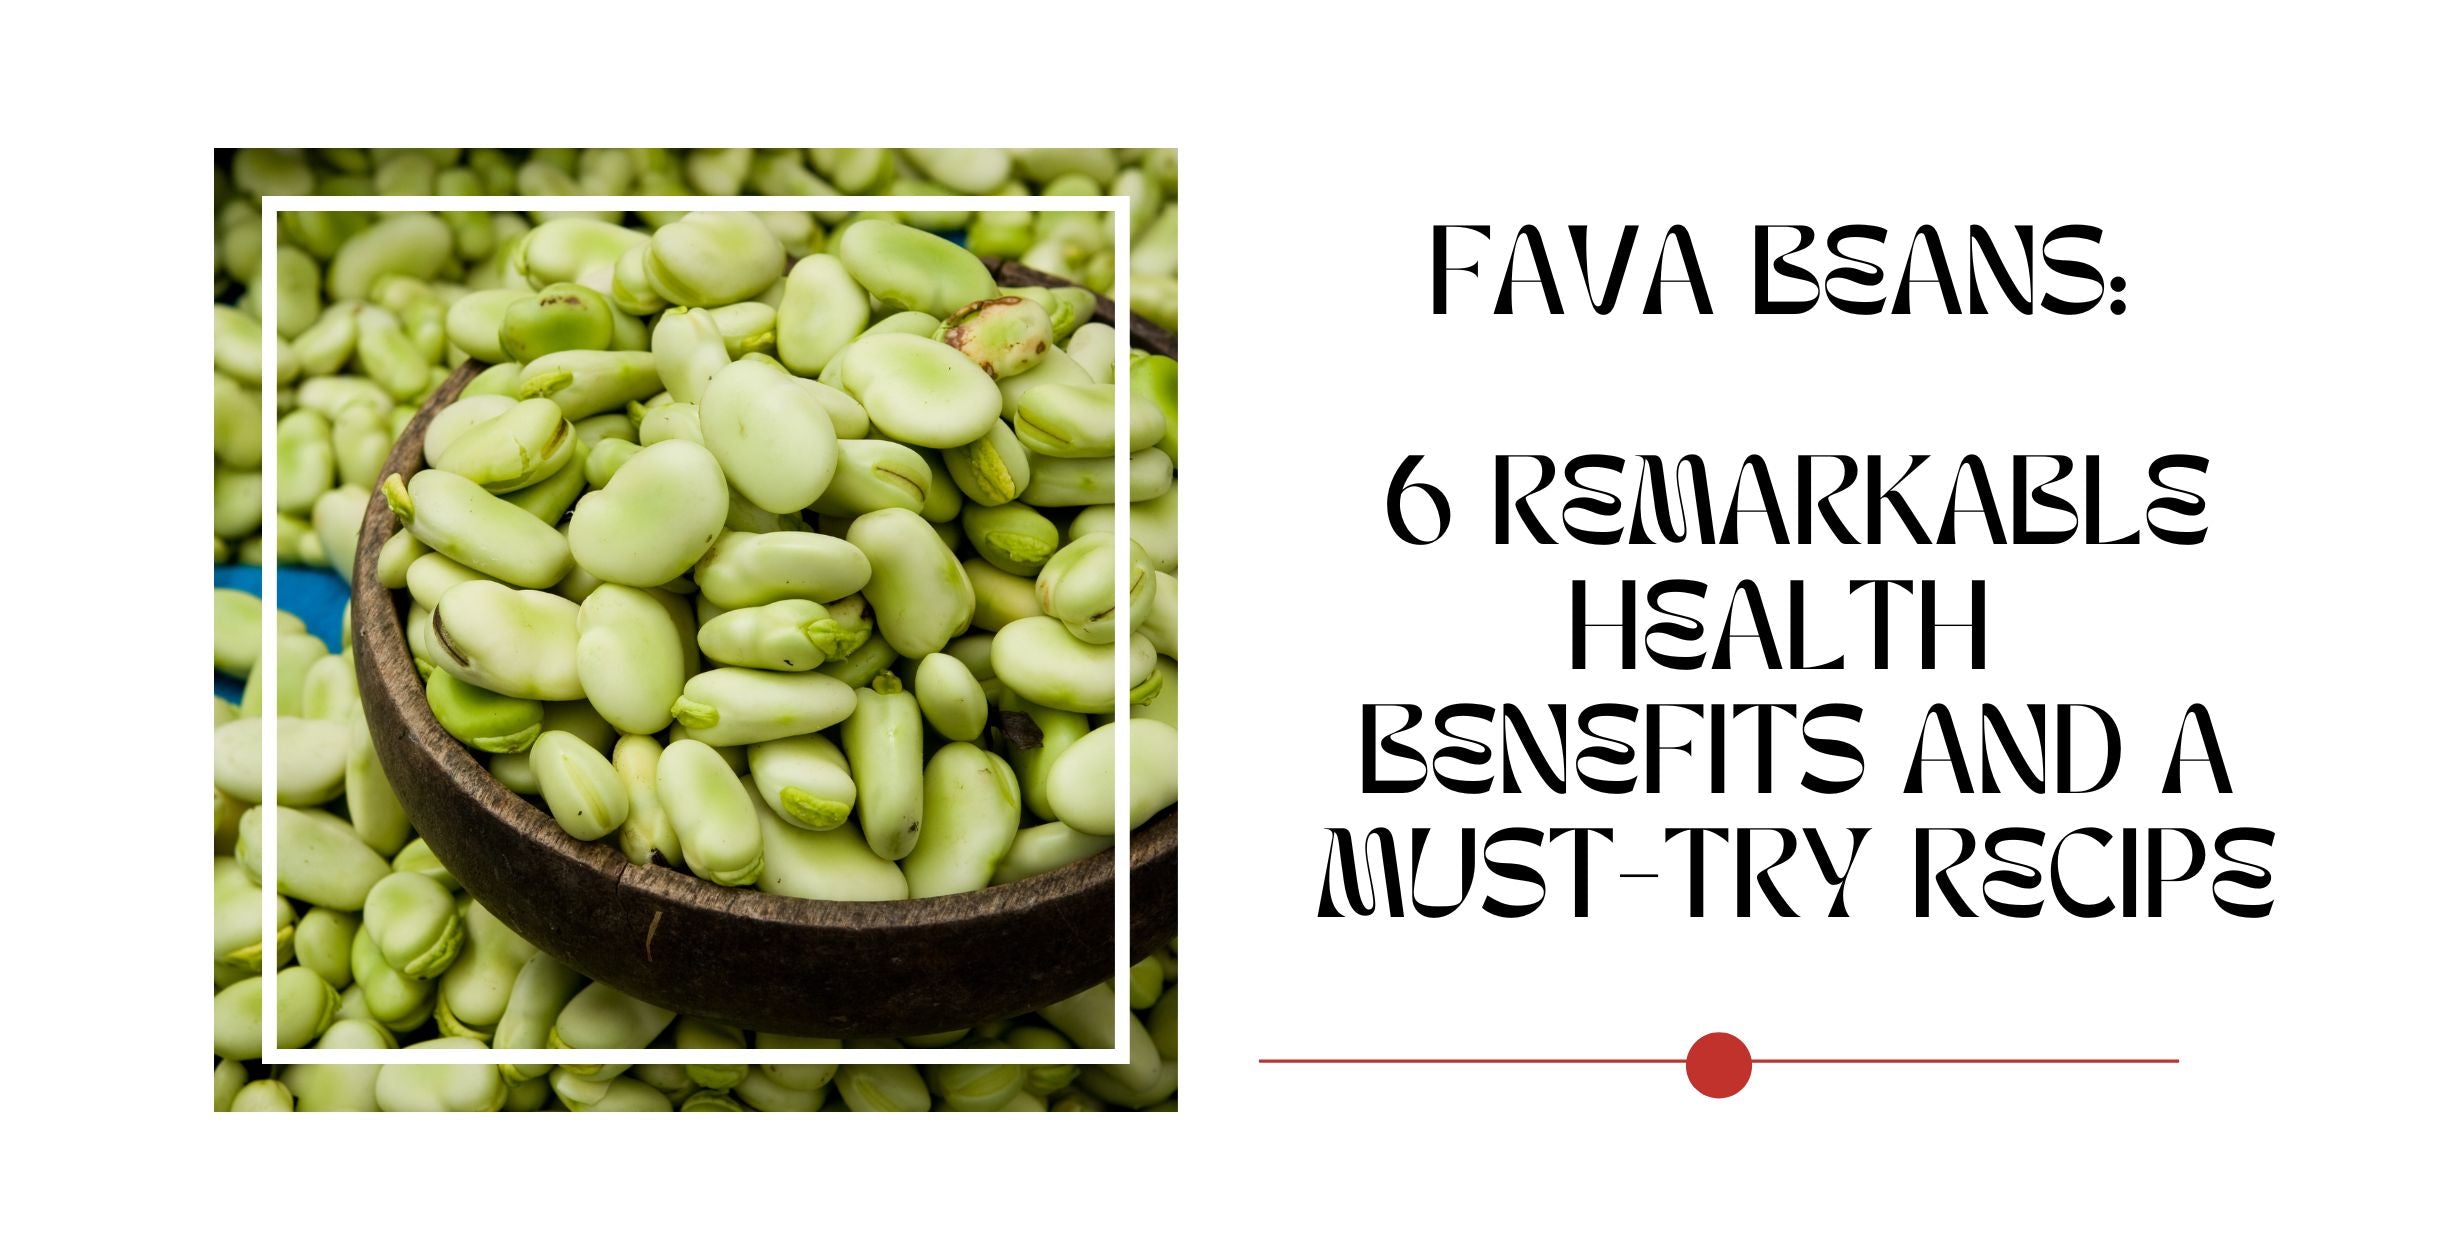 Fava Beans: 6 Remarkable Health Benefits and a Must-Try Recipe